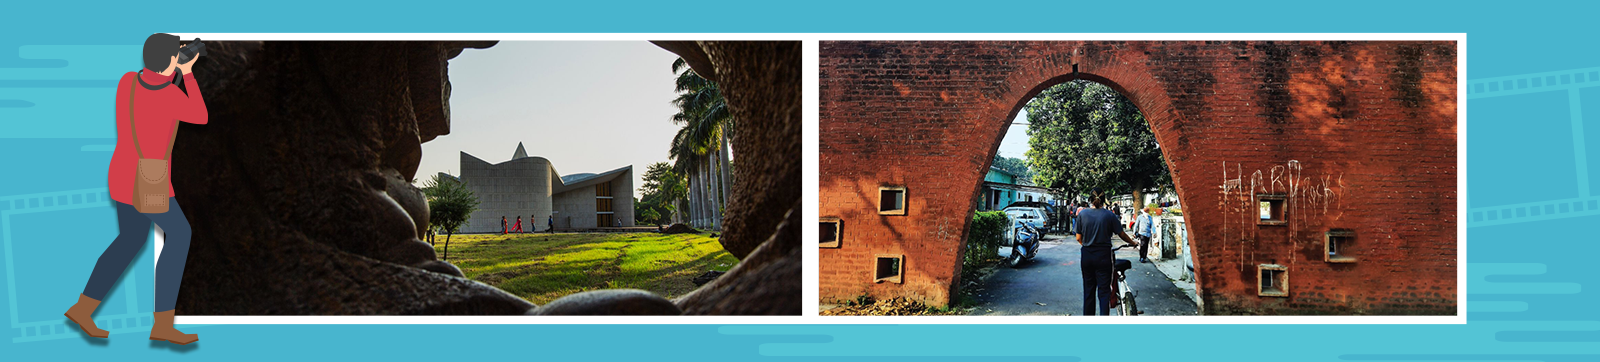 Chandigarh, the architectural feat, see it in pictures for yourself at CLKA